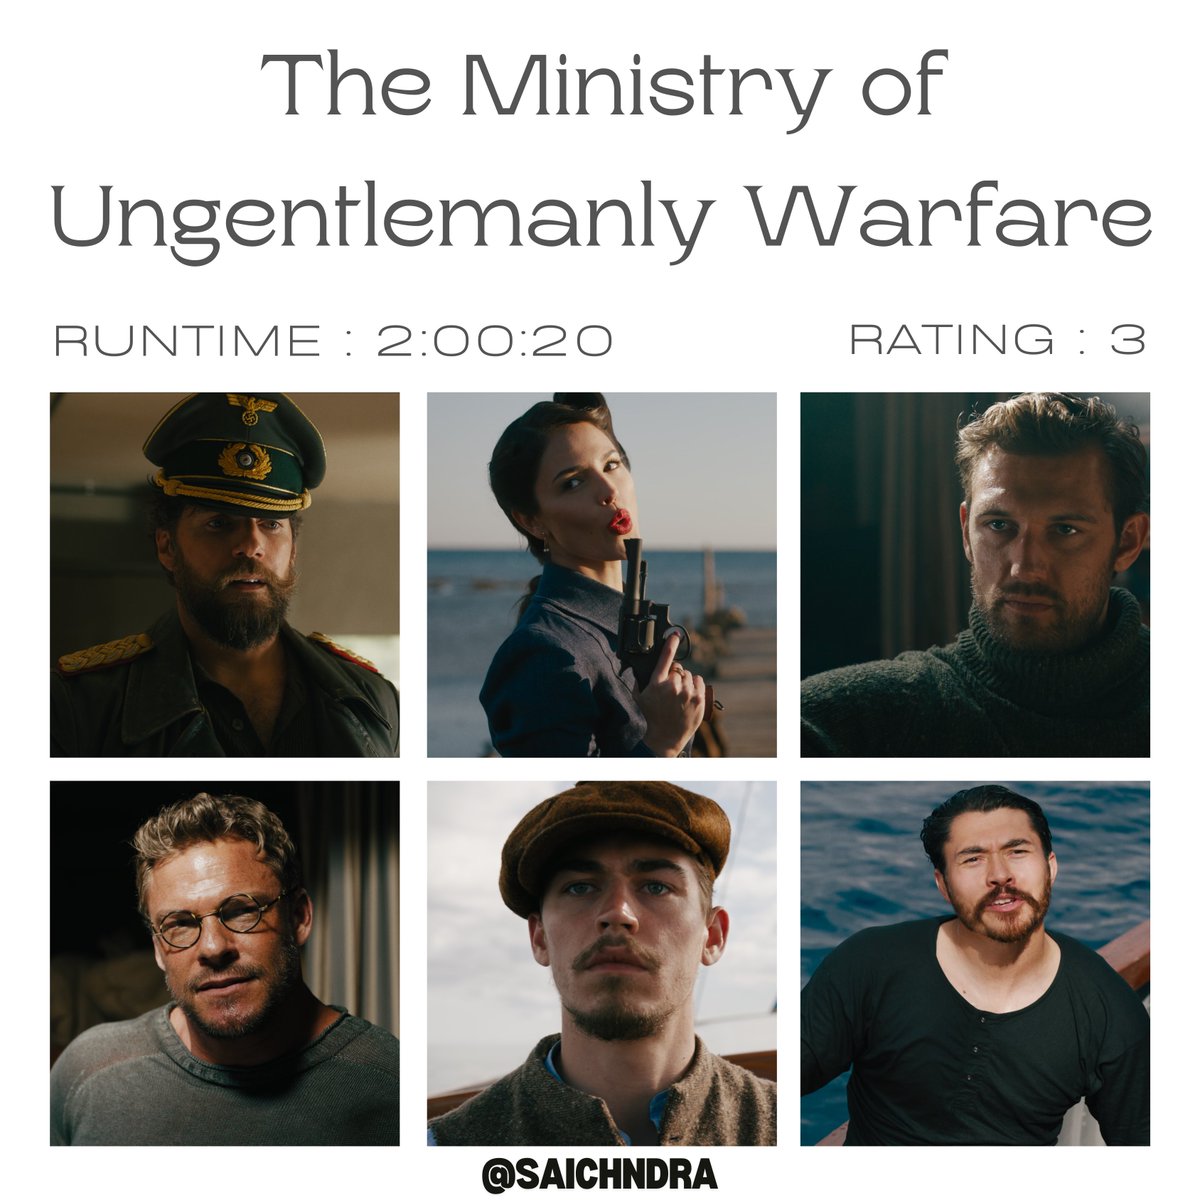 #TheMinistryofUngentlemanlyWarfare: #GuyRitchie assembles a star-studded cast for a mission to take down Nazis in an ungentlemanly fashion in a passable film based on a true story….

#HenryCavill #AlanRitchson